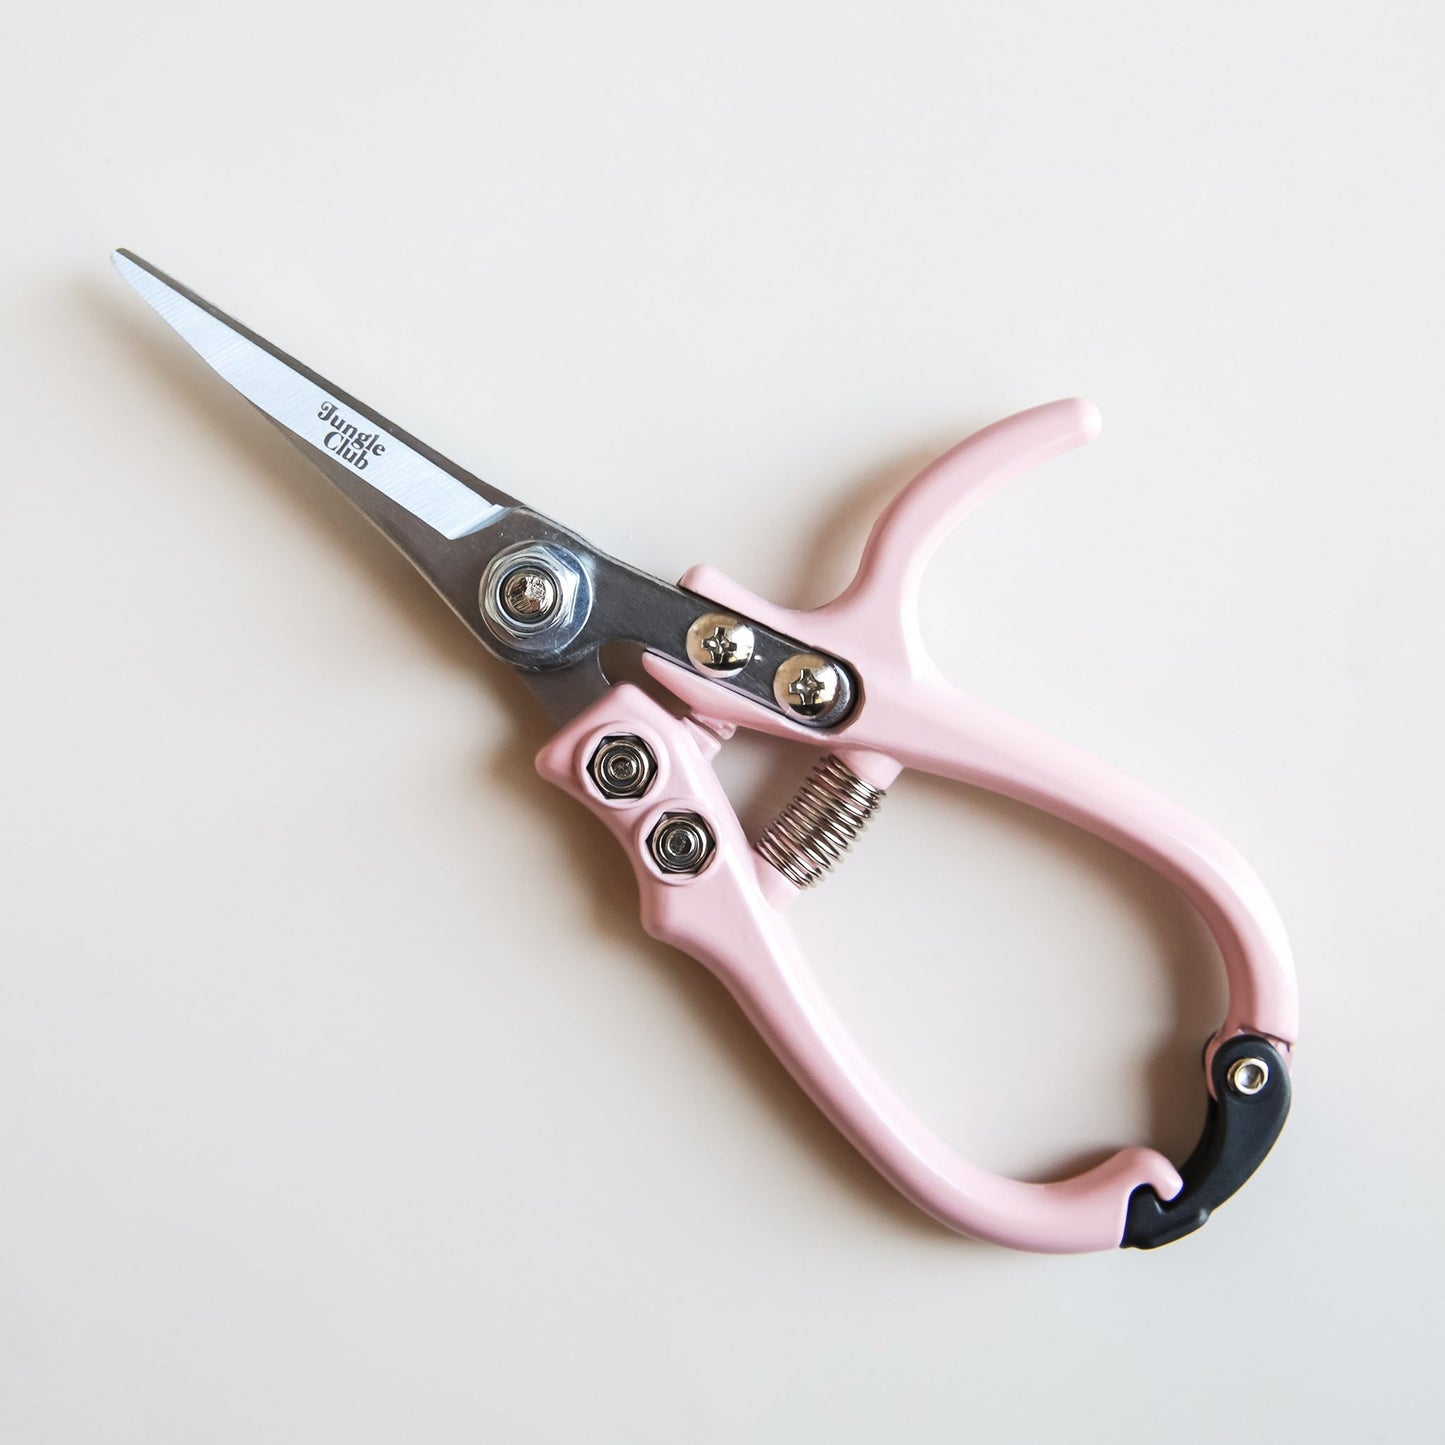 Pair of pruning shears with pastel pink handles and metal blades. The outer blade reads 'jungle club' in small, playful lettering. The pruning shears have a black clasp at the top of the handles to secure them closed.